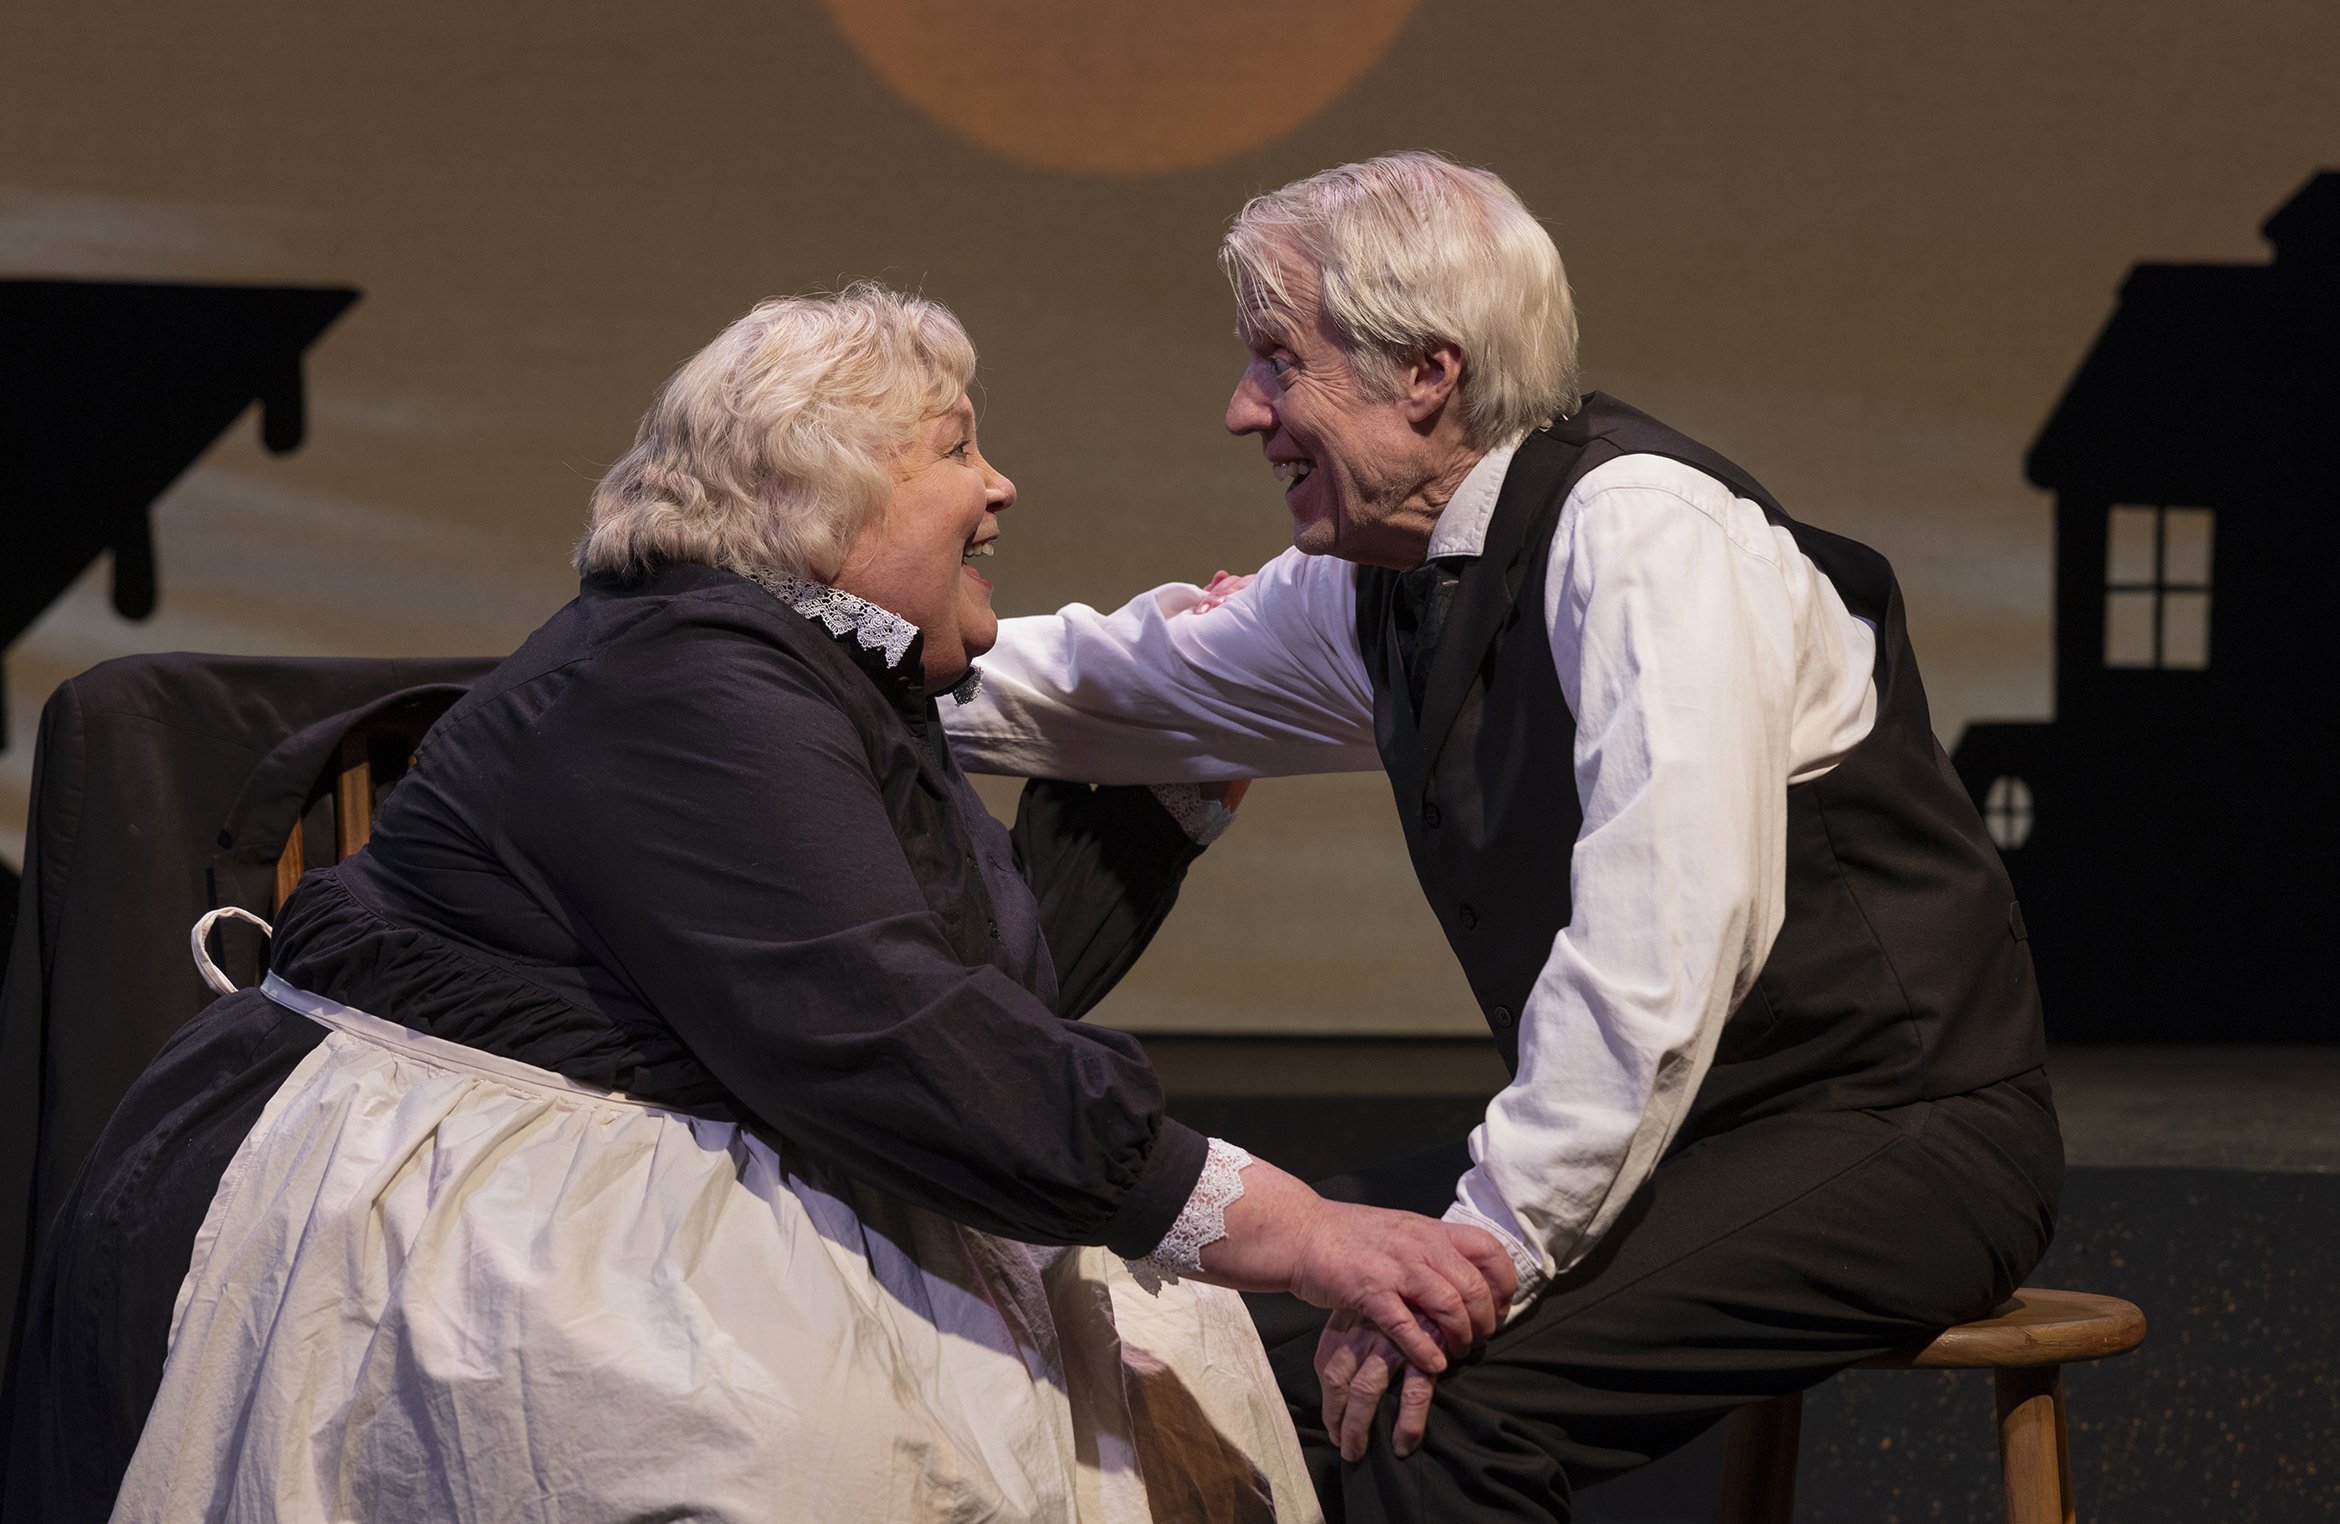 Cynthia Meier and Joseph McGrath as Mr and Mrs Cherry Owen. Photo by Tim Fuller.